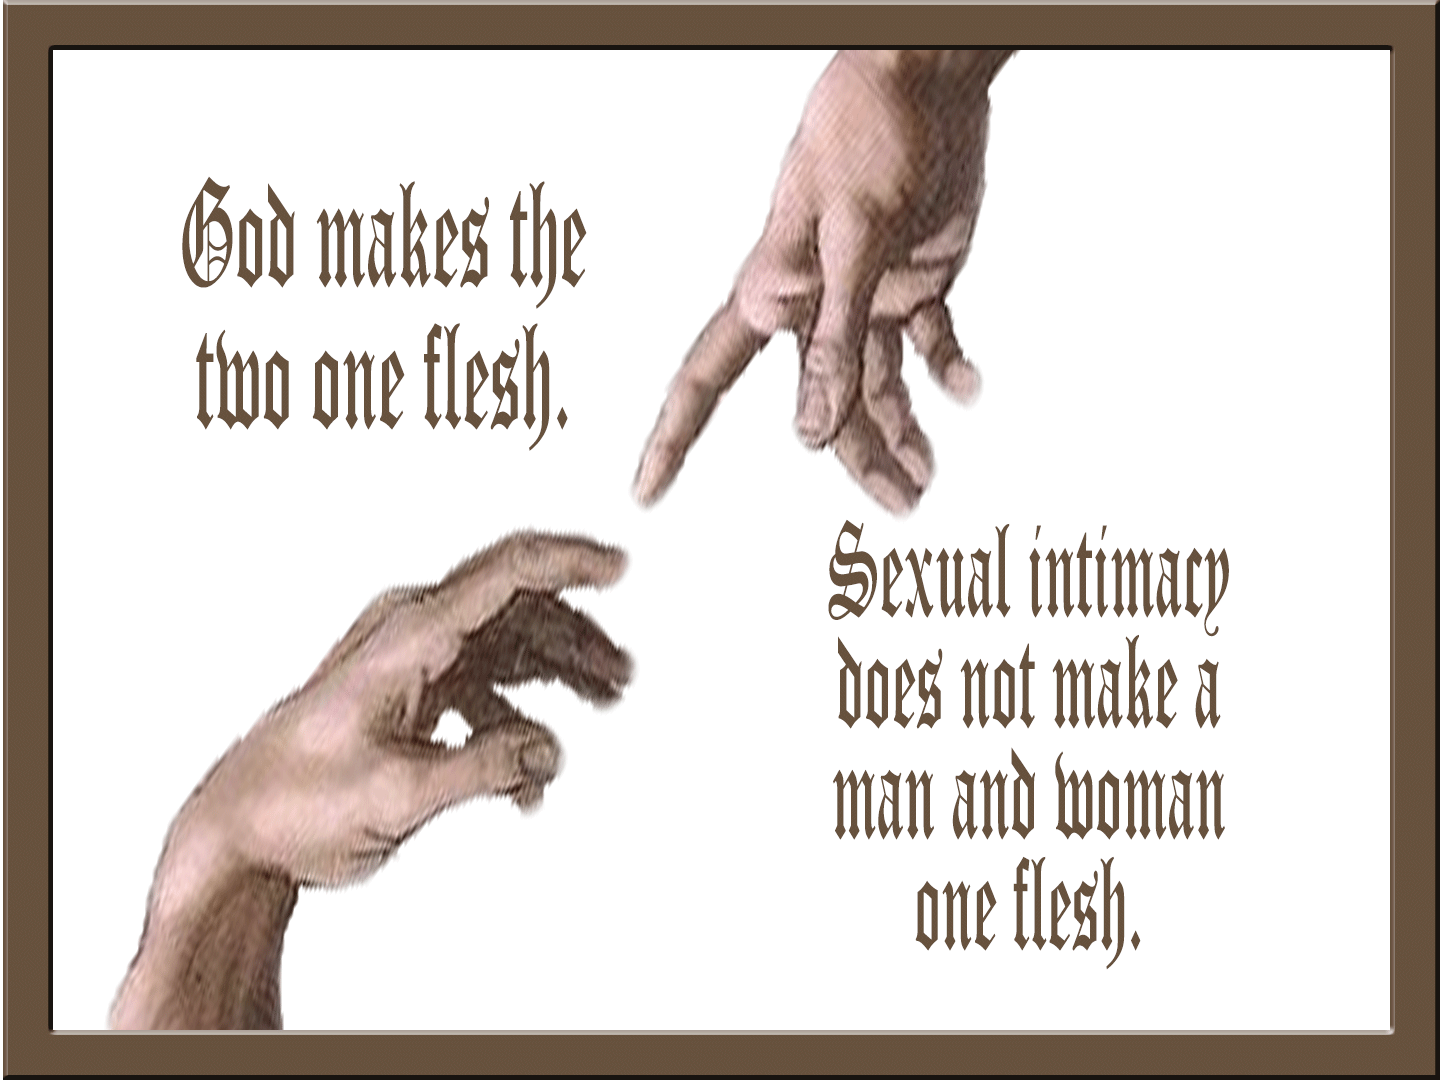 God makes the two one flesh. Sexual intimacy does not make a man and woman one flesh: two hands with outstretched index fingers reaching toward one another